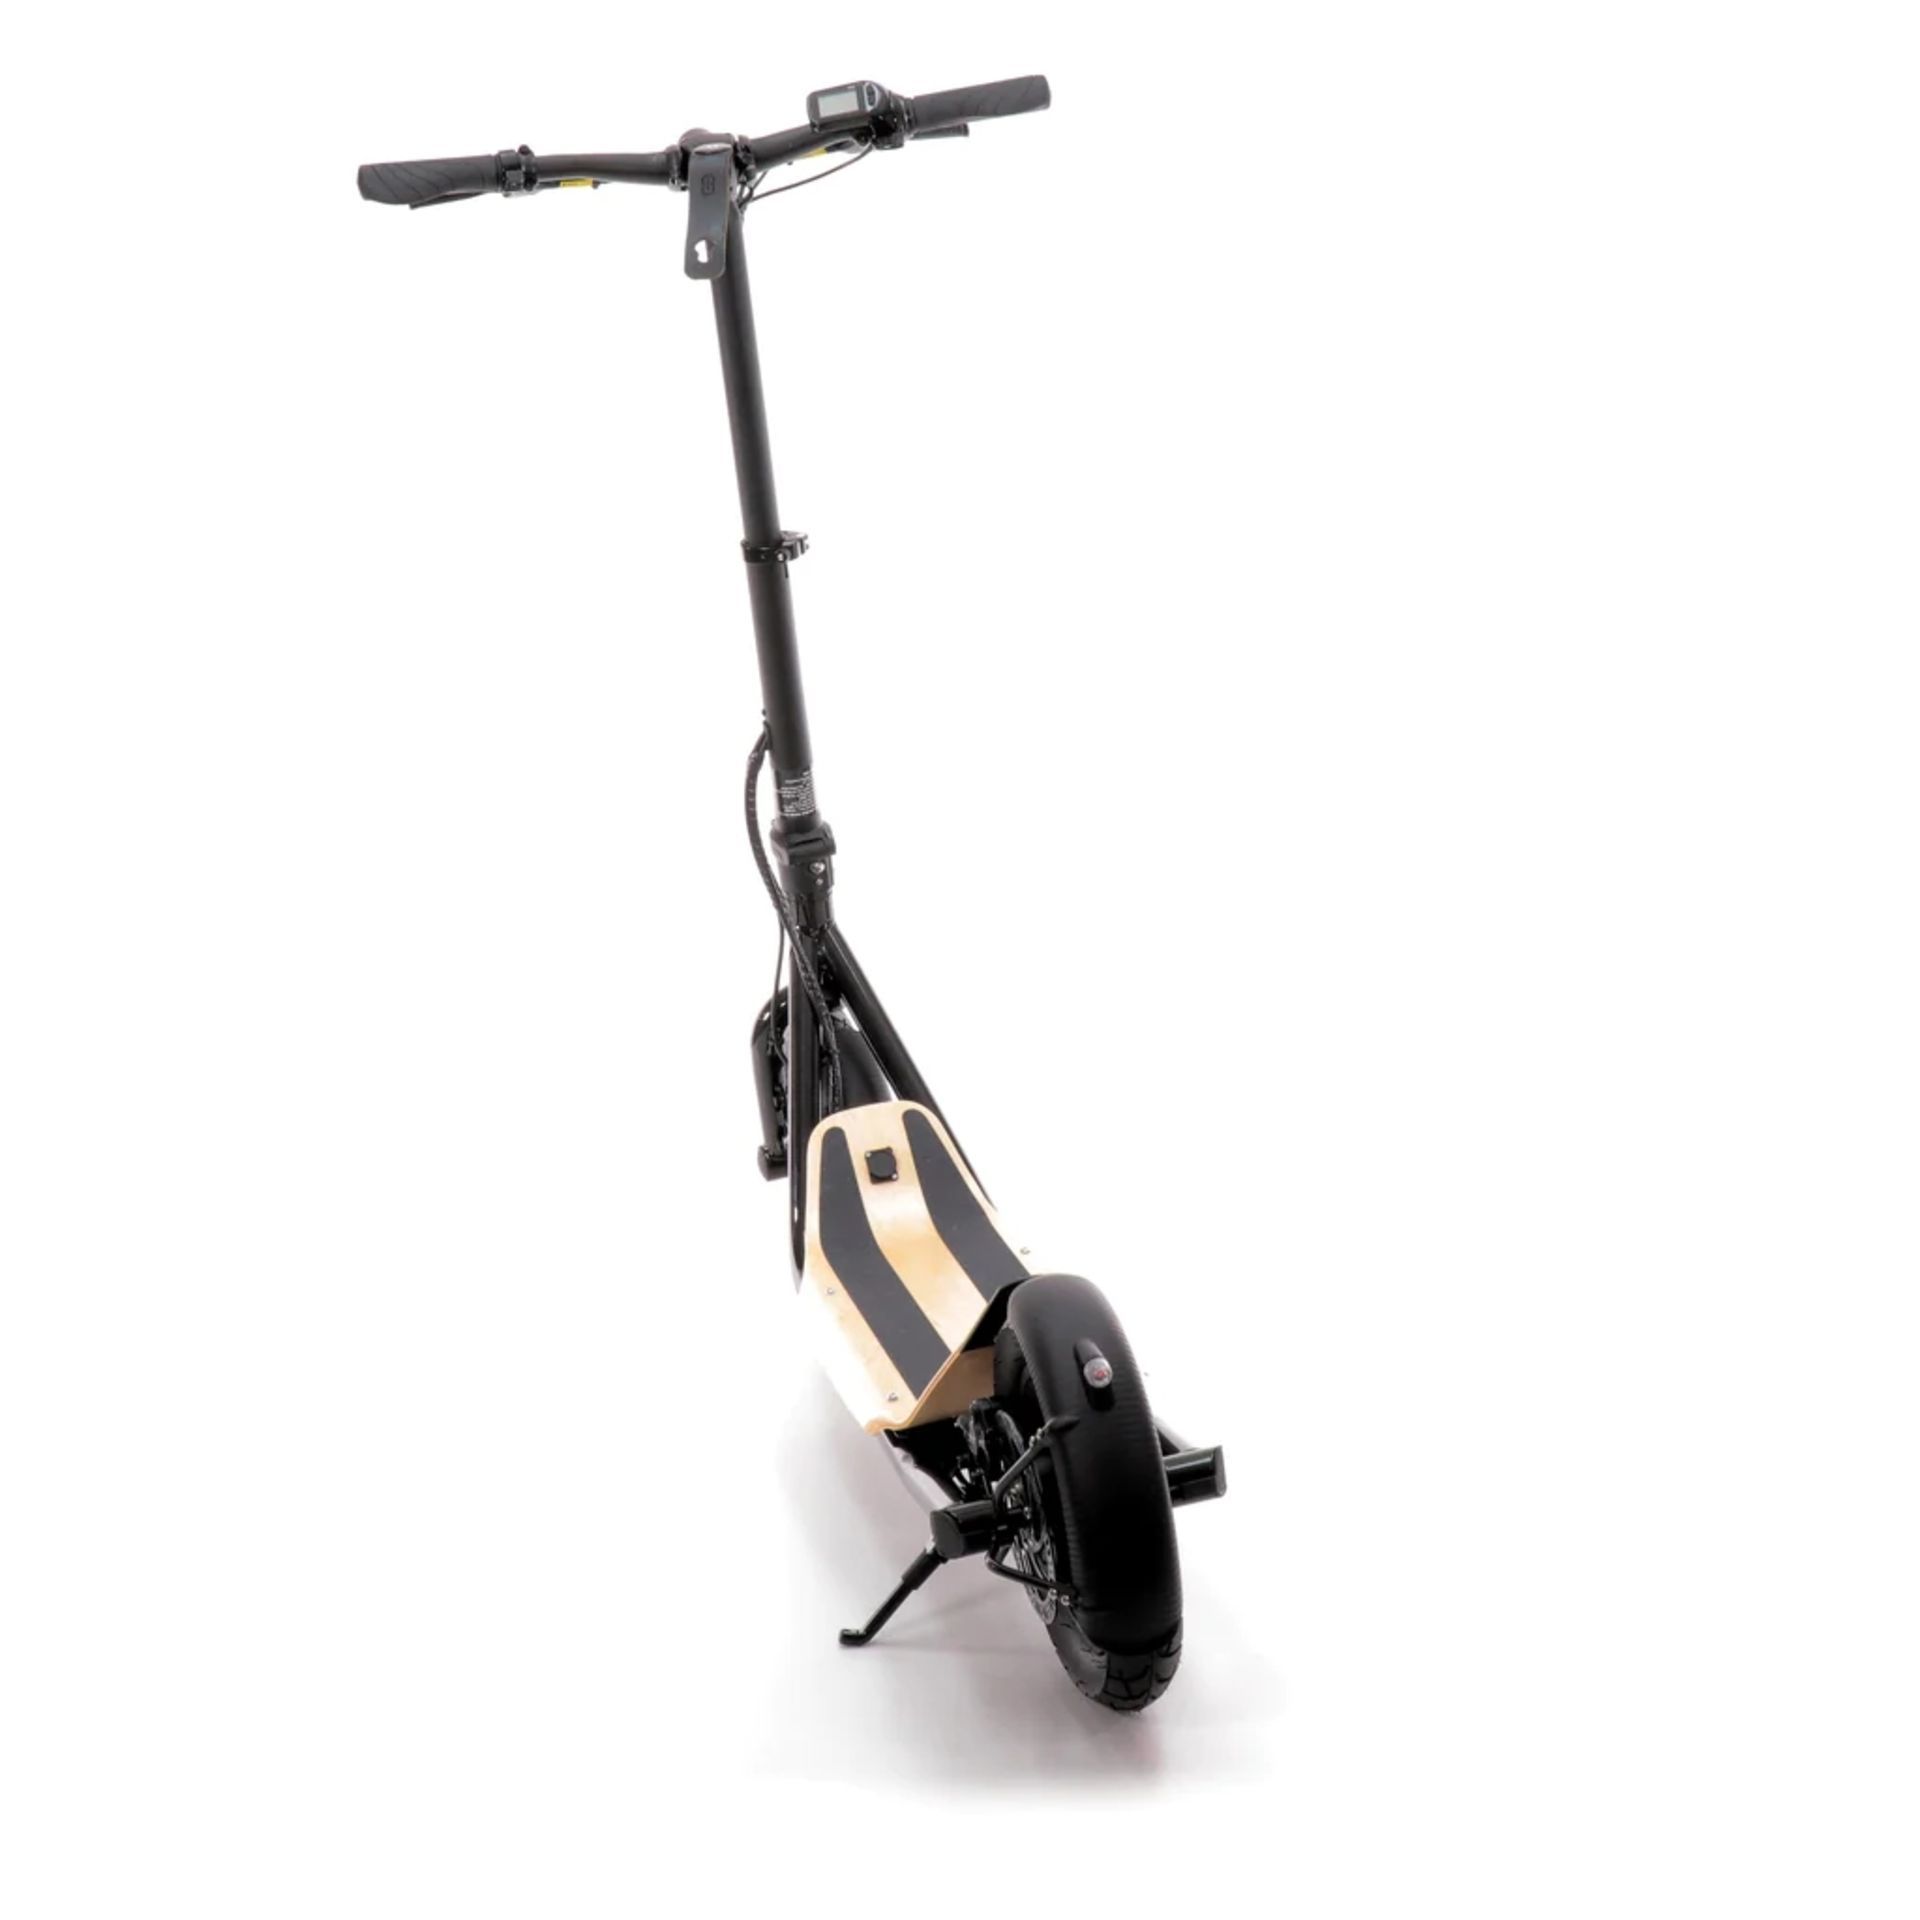 BRAND NEW 8TEV B12 PROXI ELECTRIC SCOOTER MATT BLACK RRP £1299, Perfect city commuter vehicle with - Image 2 of 2